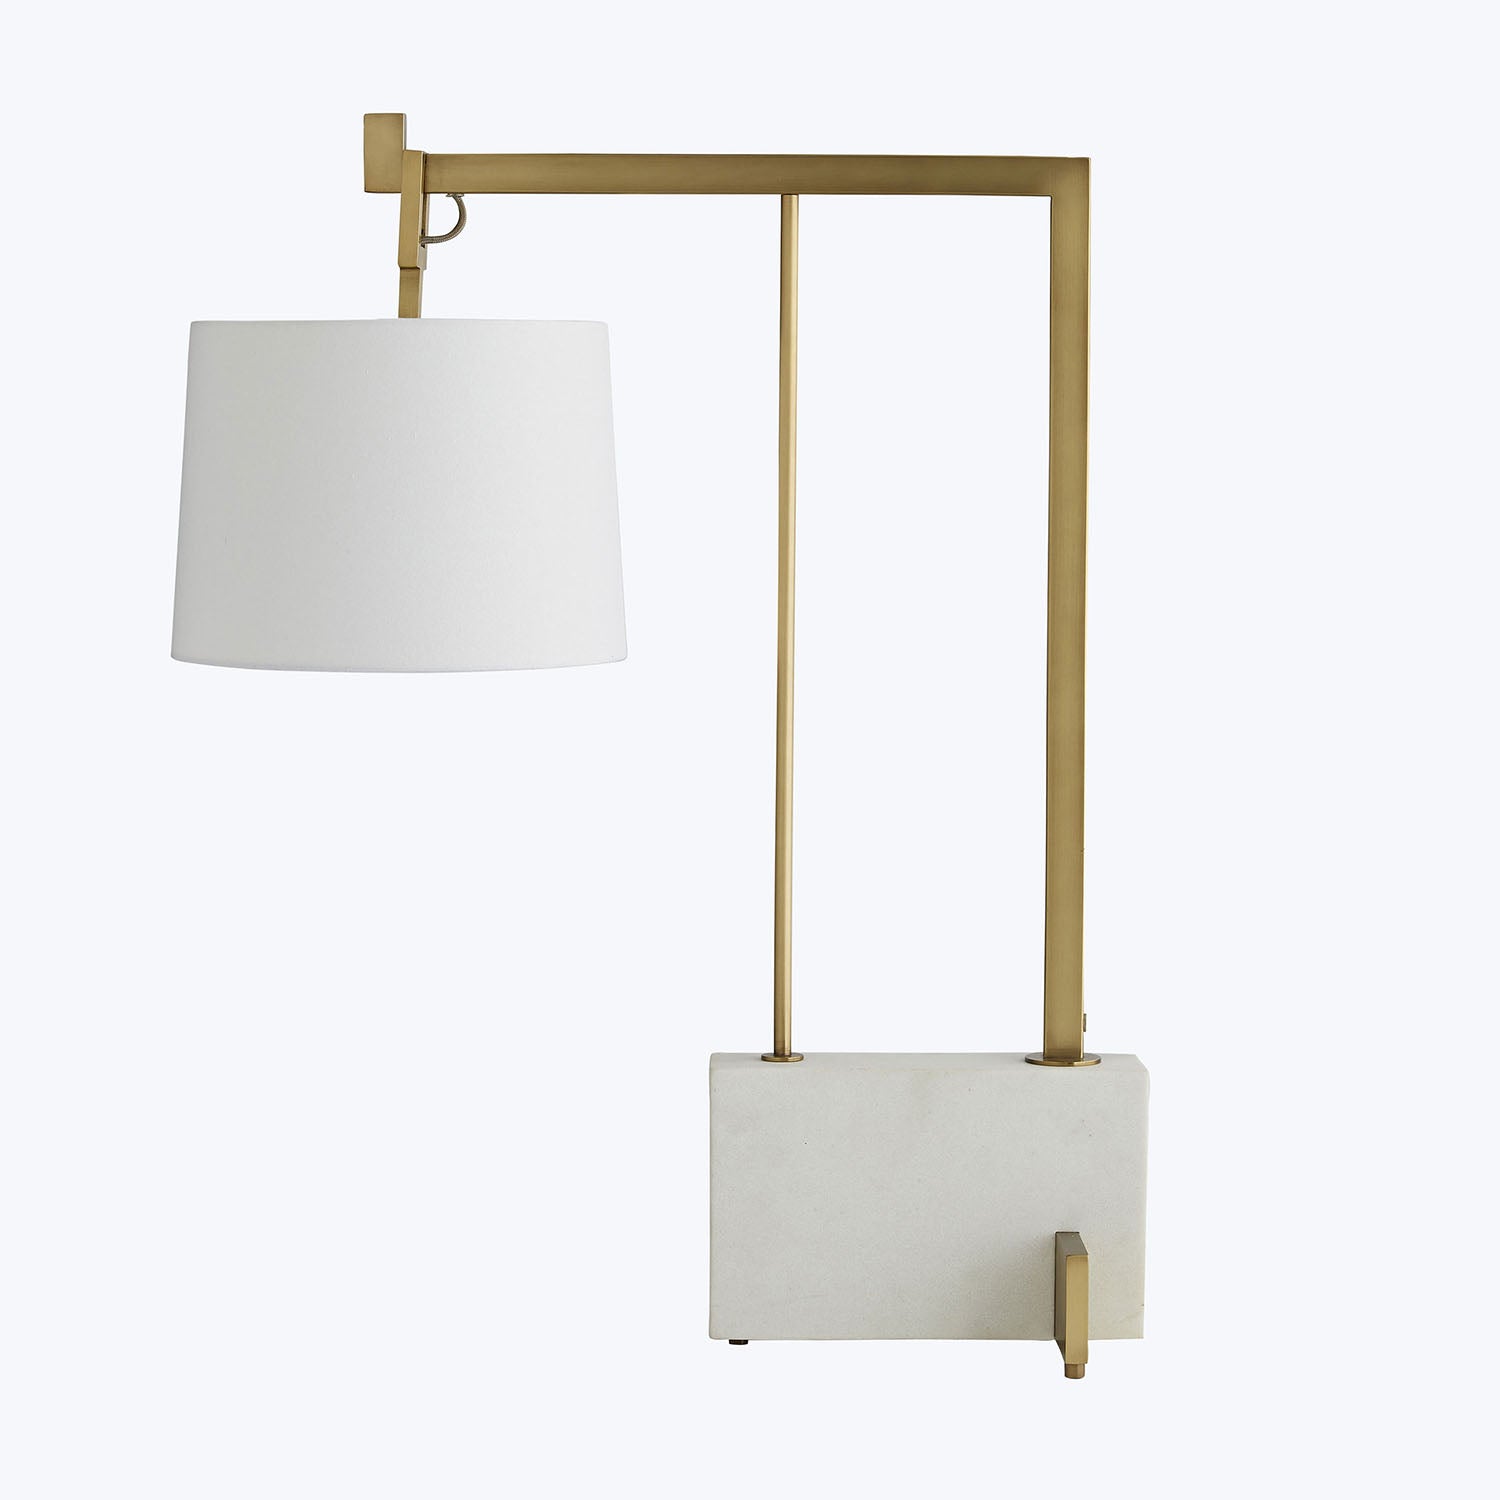 Modern geometric floor lamp with brass frame and white lampshade.